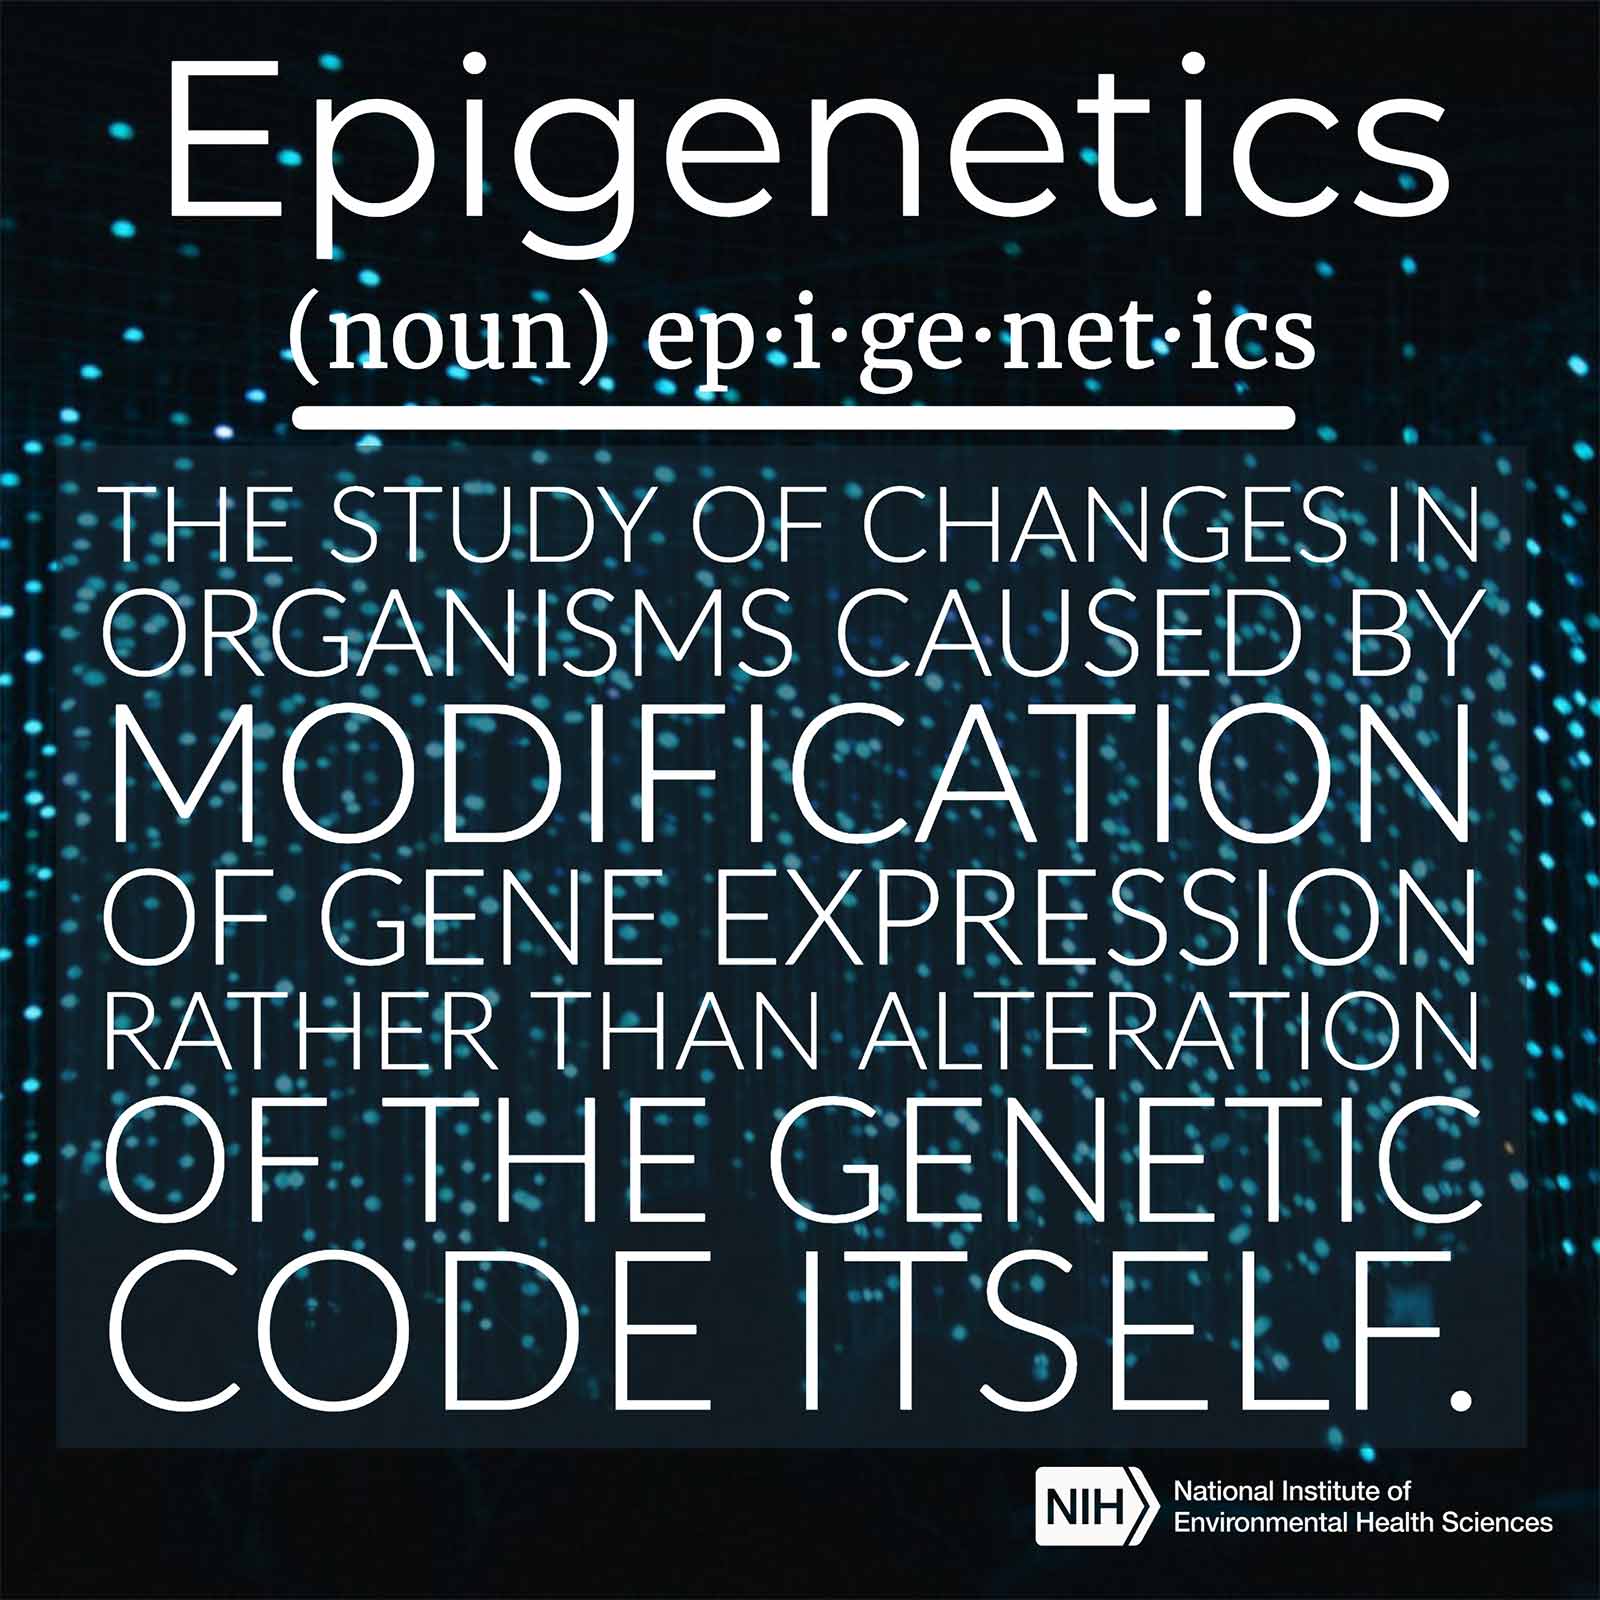 Epigenetics (noun) defined as &#39;The study of changes in organisms caused by modification of gene expression rather than alteration of the genetic code itself.&#39;